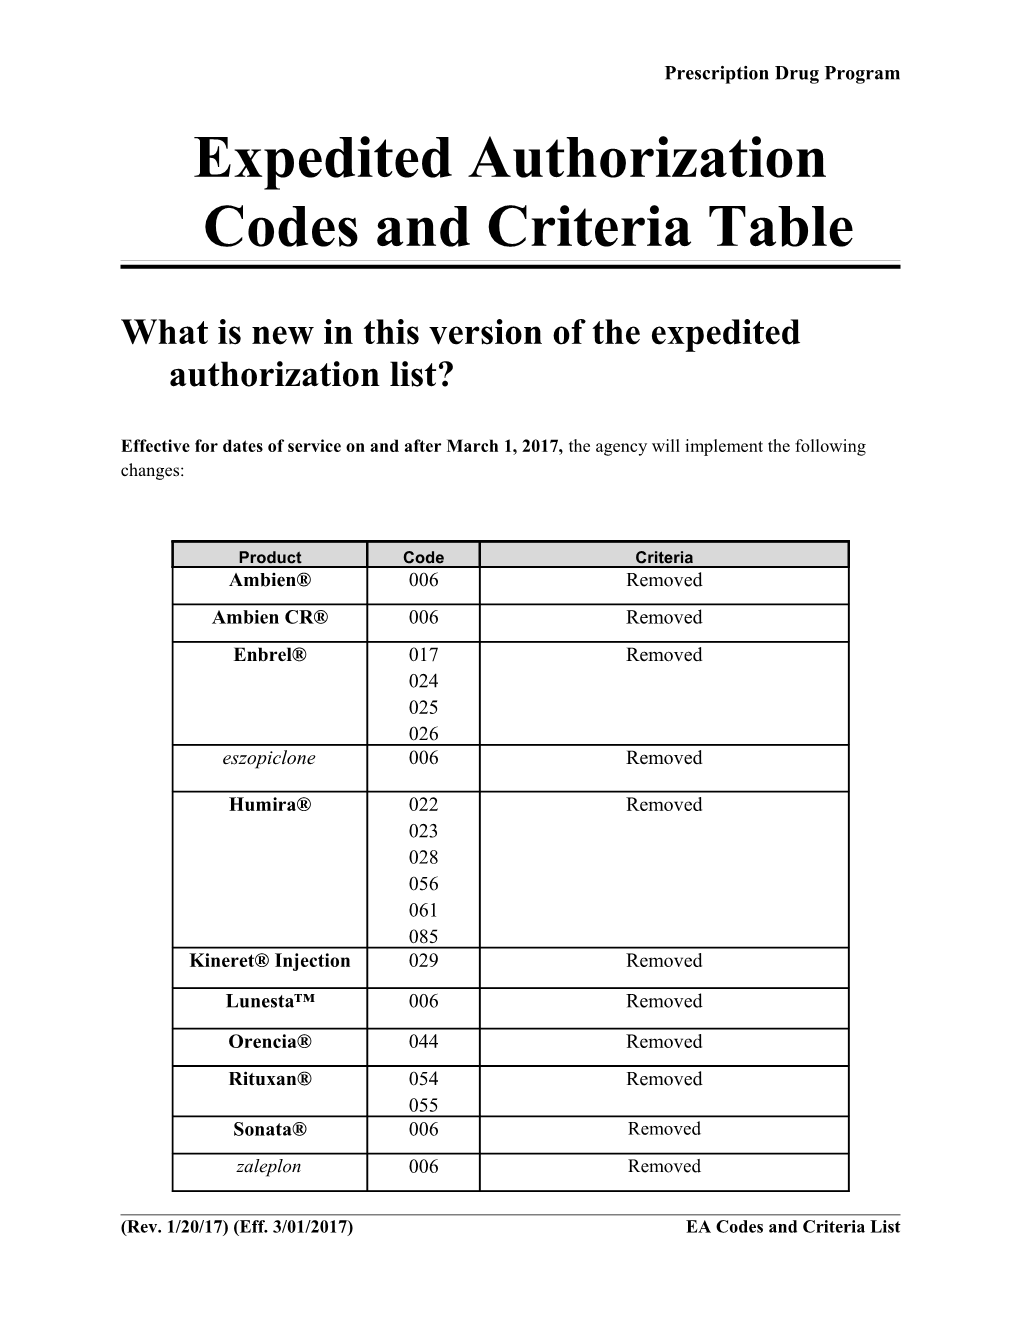 Expedited Authorization Codes and Criteria Table